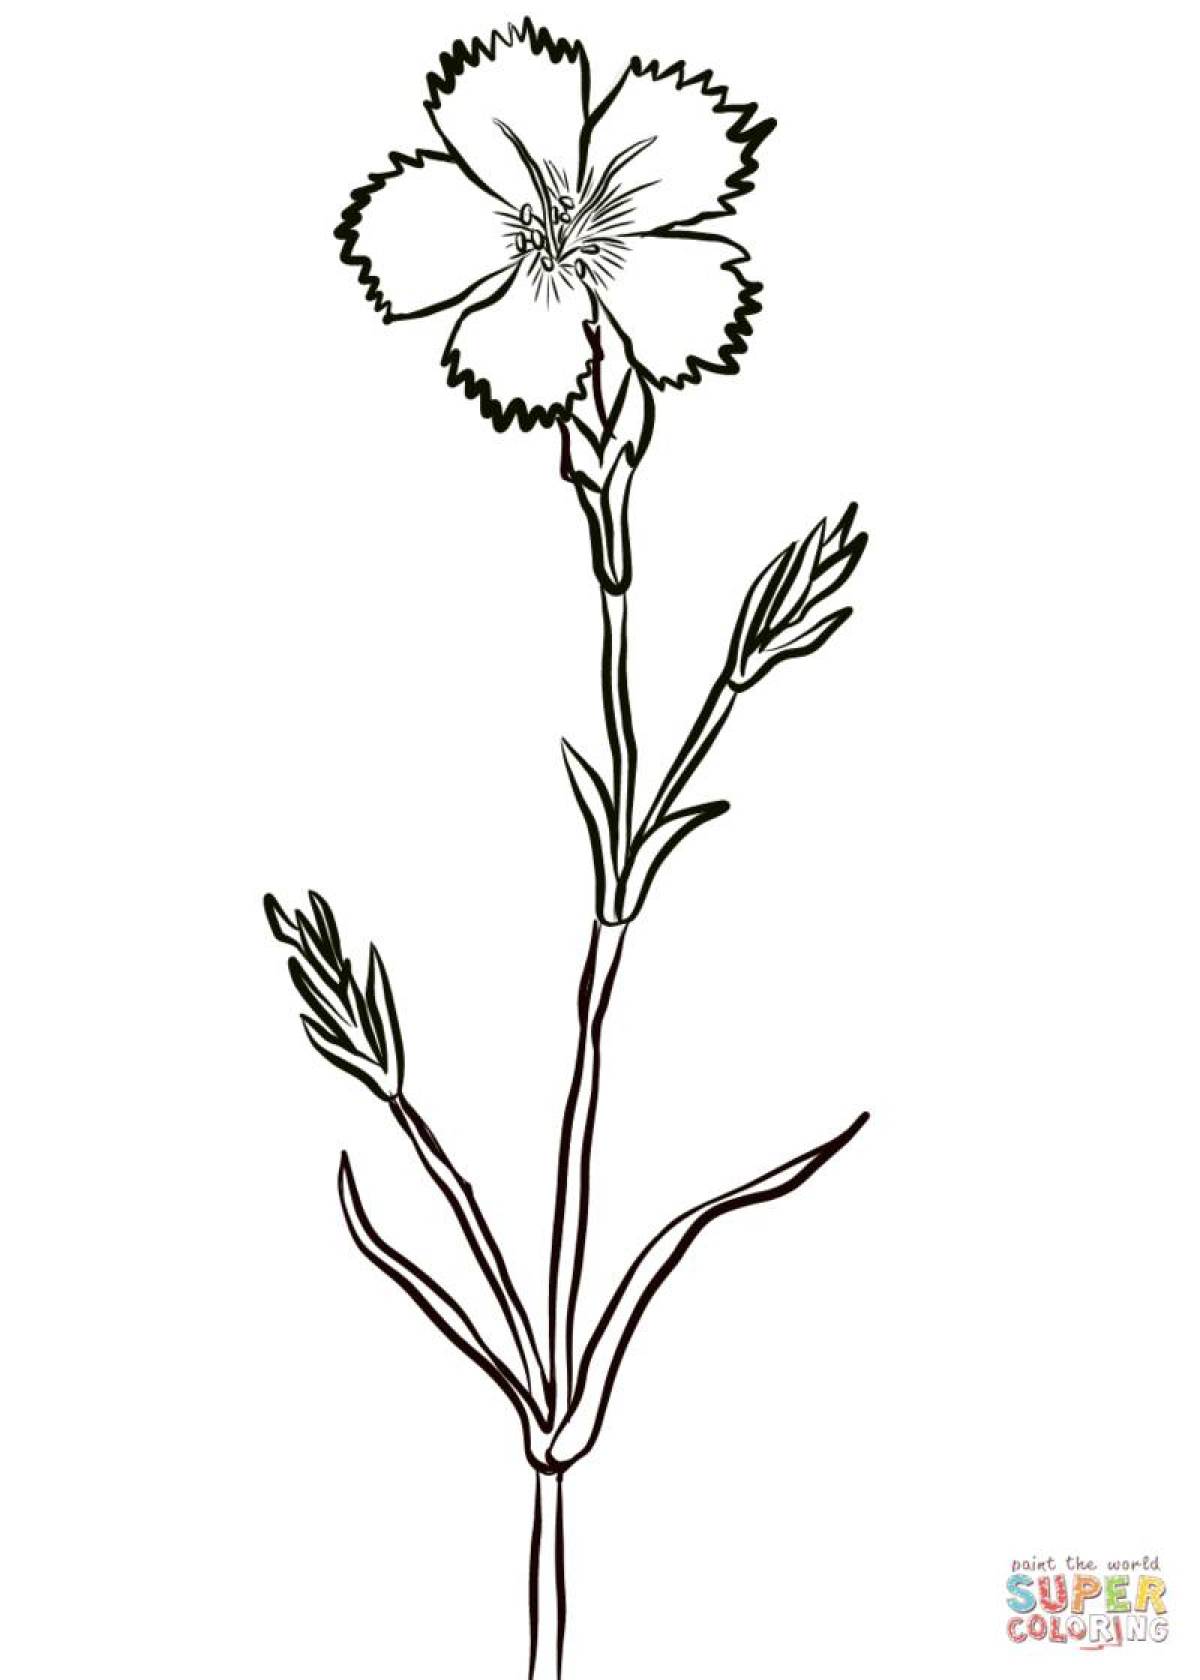 A fun carnation coloring book for preschoolers